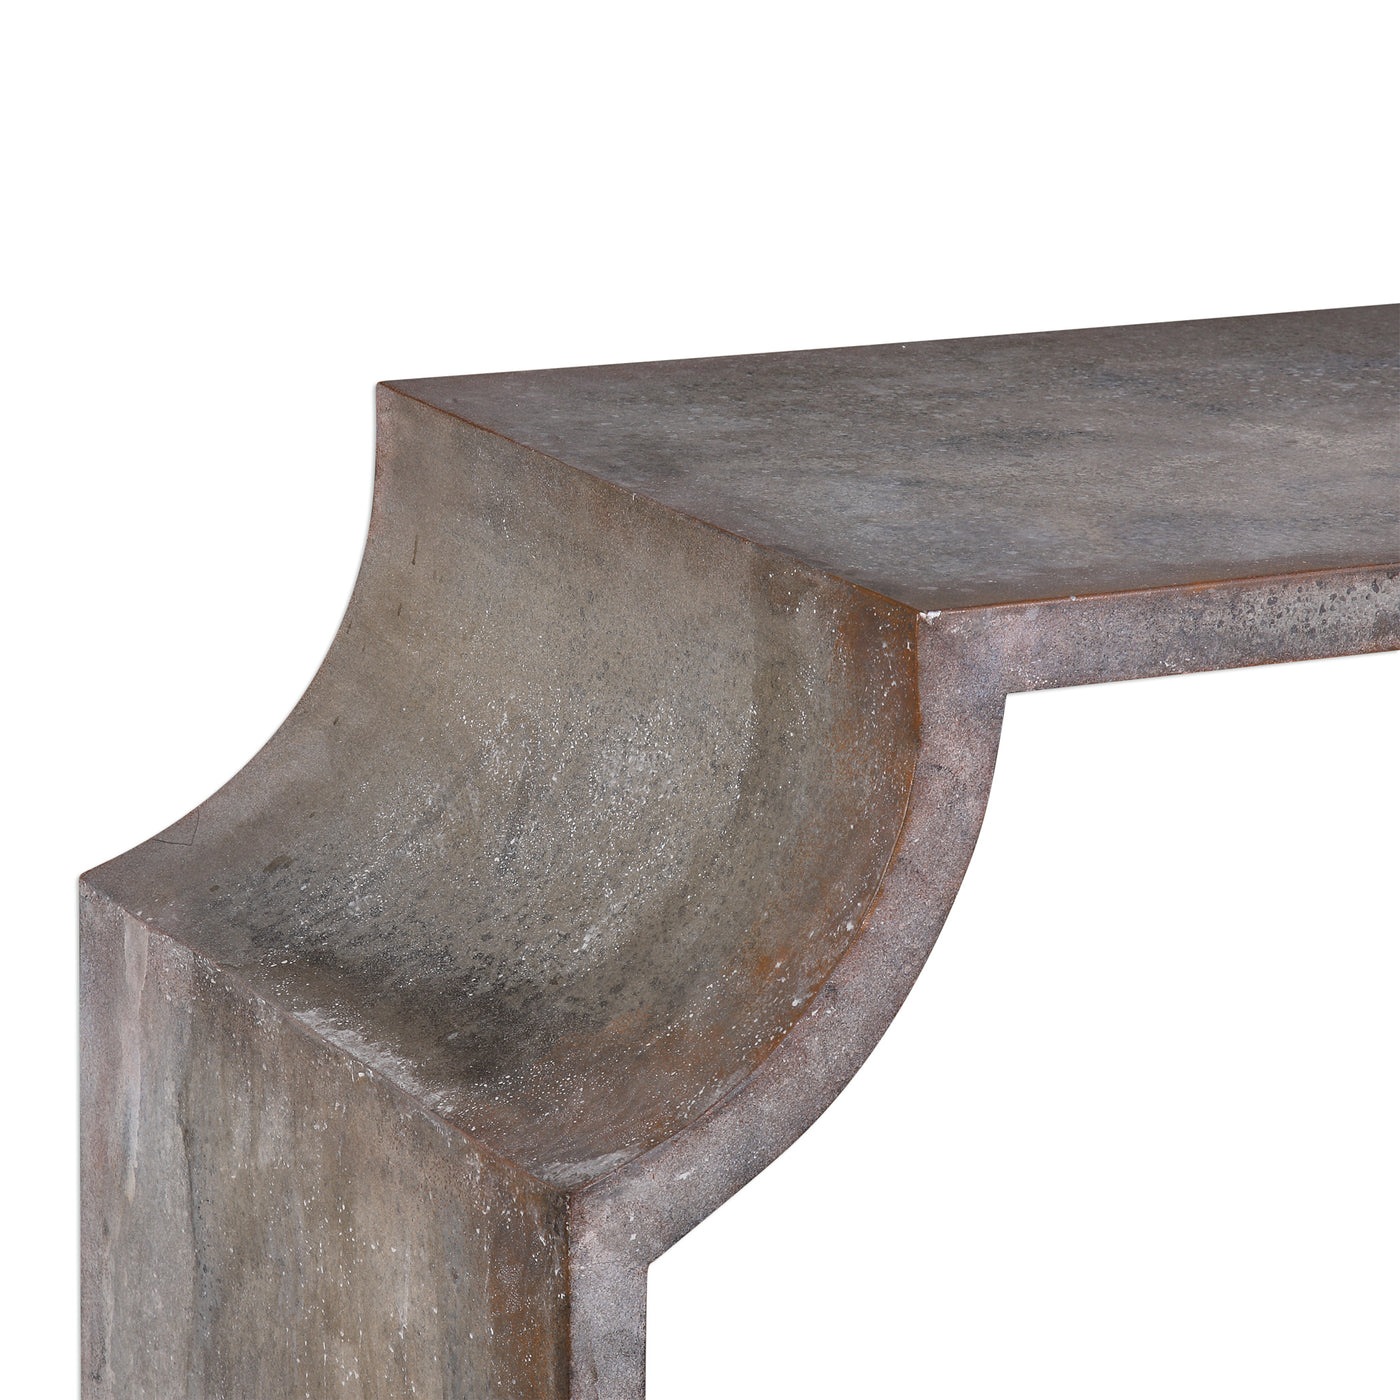 Ancient Scroll Legs Are The Focal Point Of This Table, Made From Zinc Sheeting With A Heavily Oxidized Acid Wash With Tone...